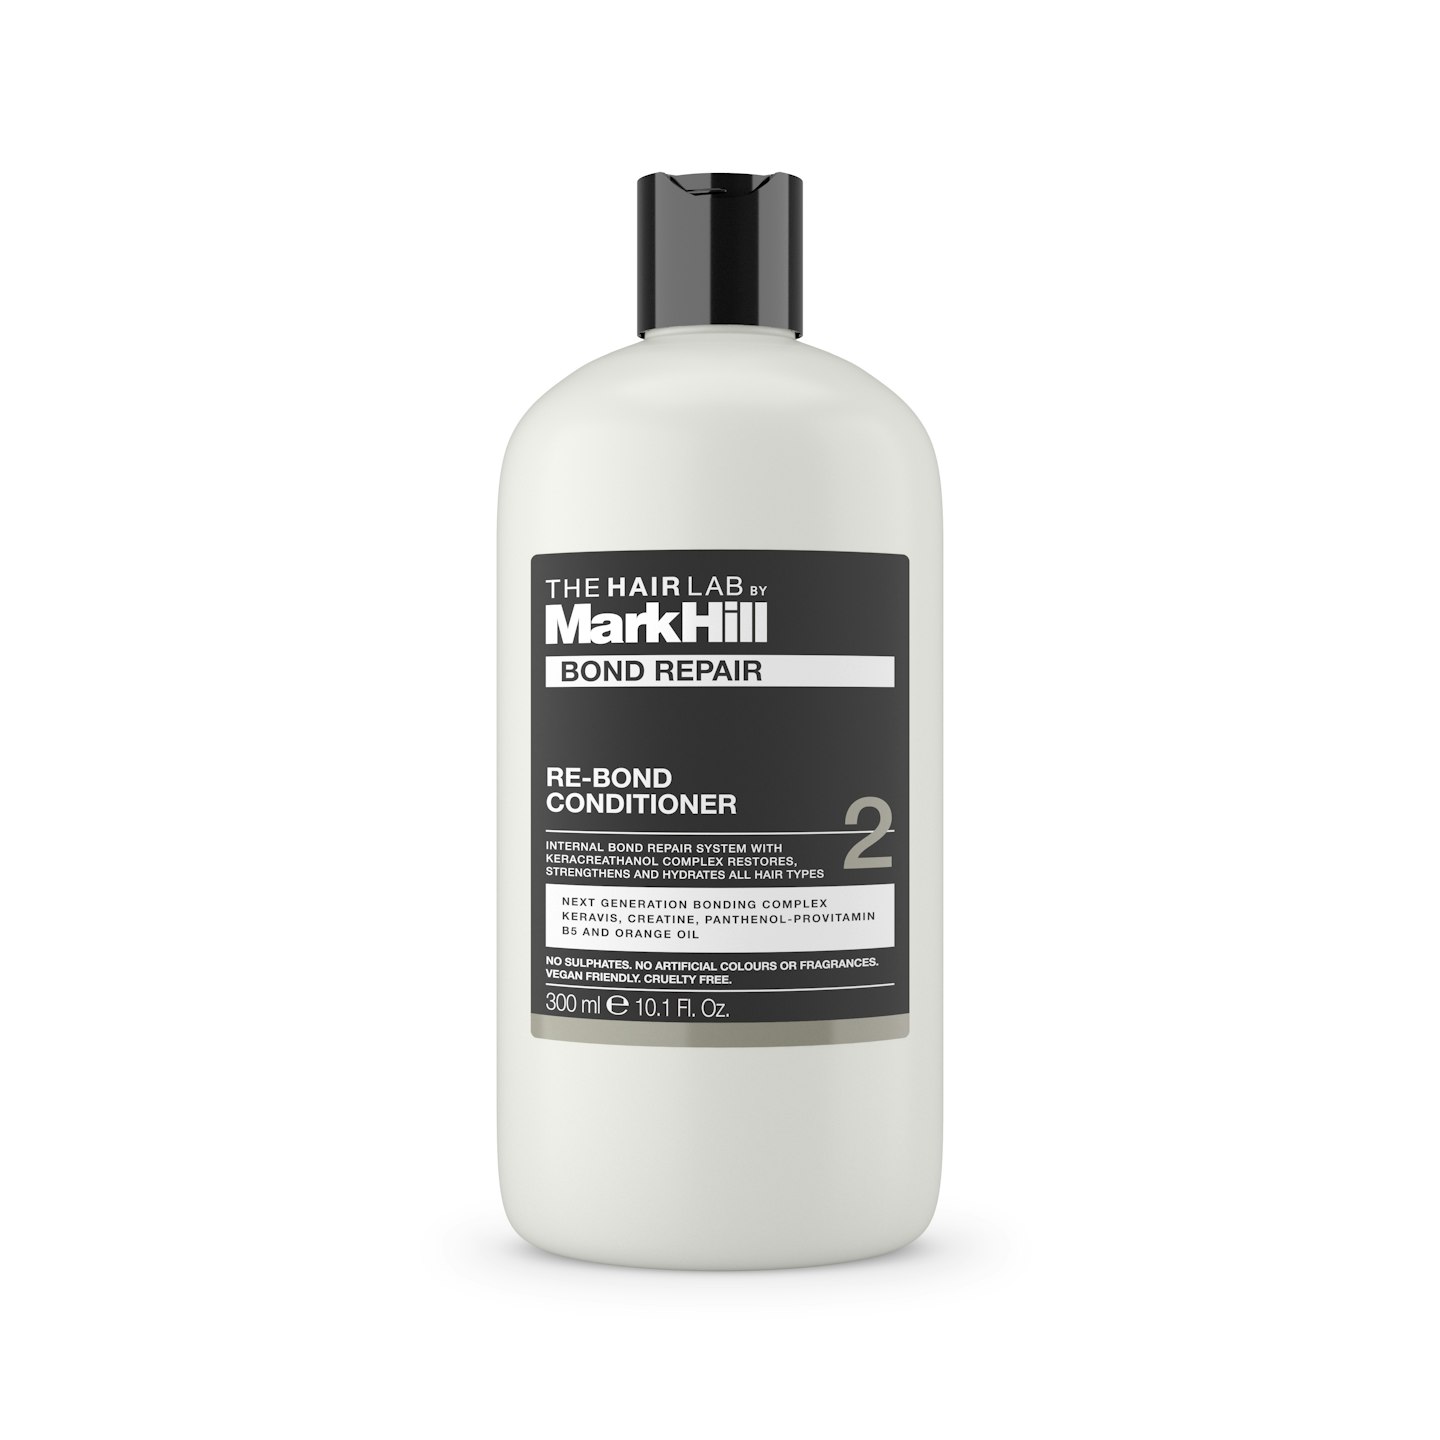 The Hair Lab by Mark Hill Re-Bond Conditioner 300ml u2605u2605u2605u2605u2605 No rating value for The Hair Lab by Mark Hill Re-Bond Conditioner 300ml